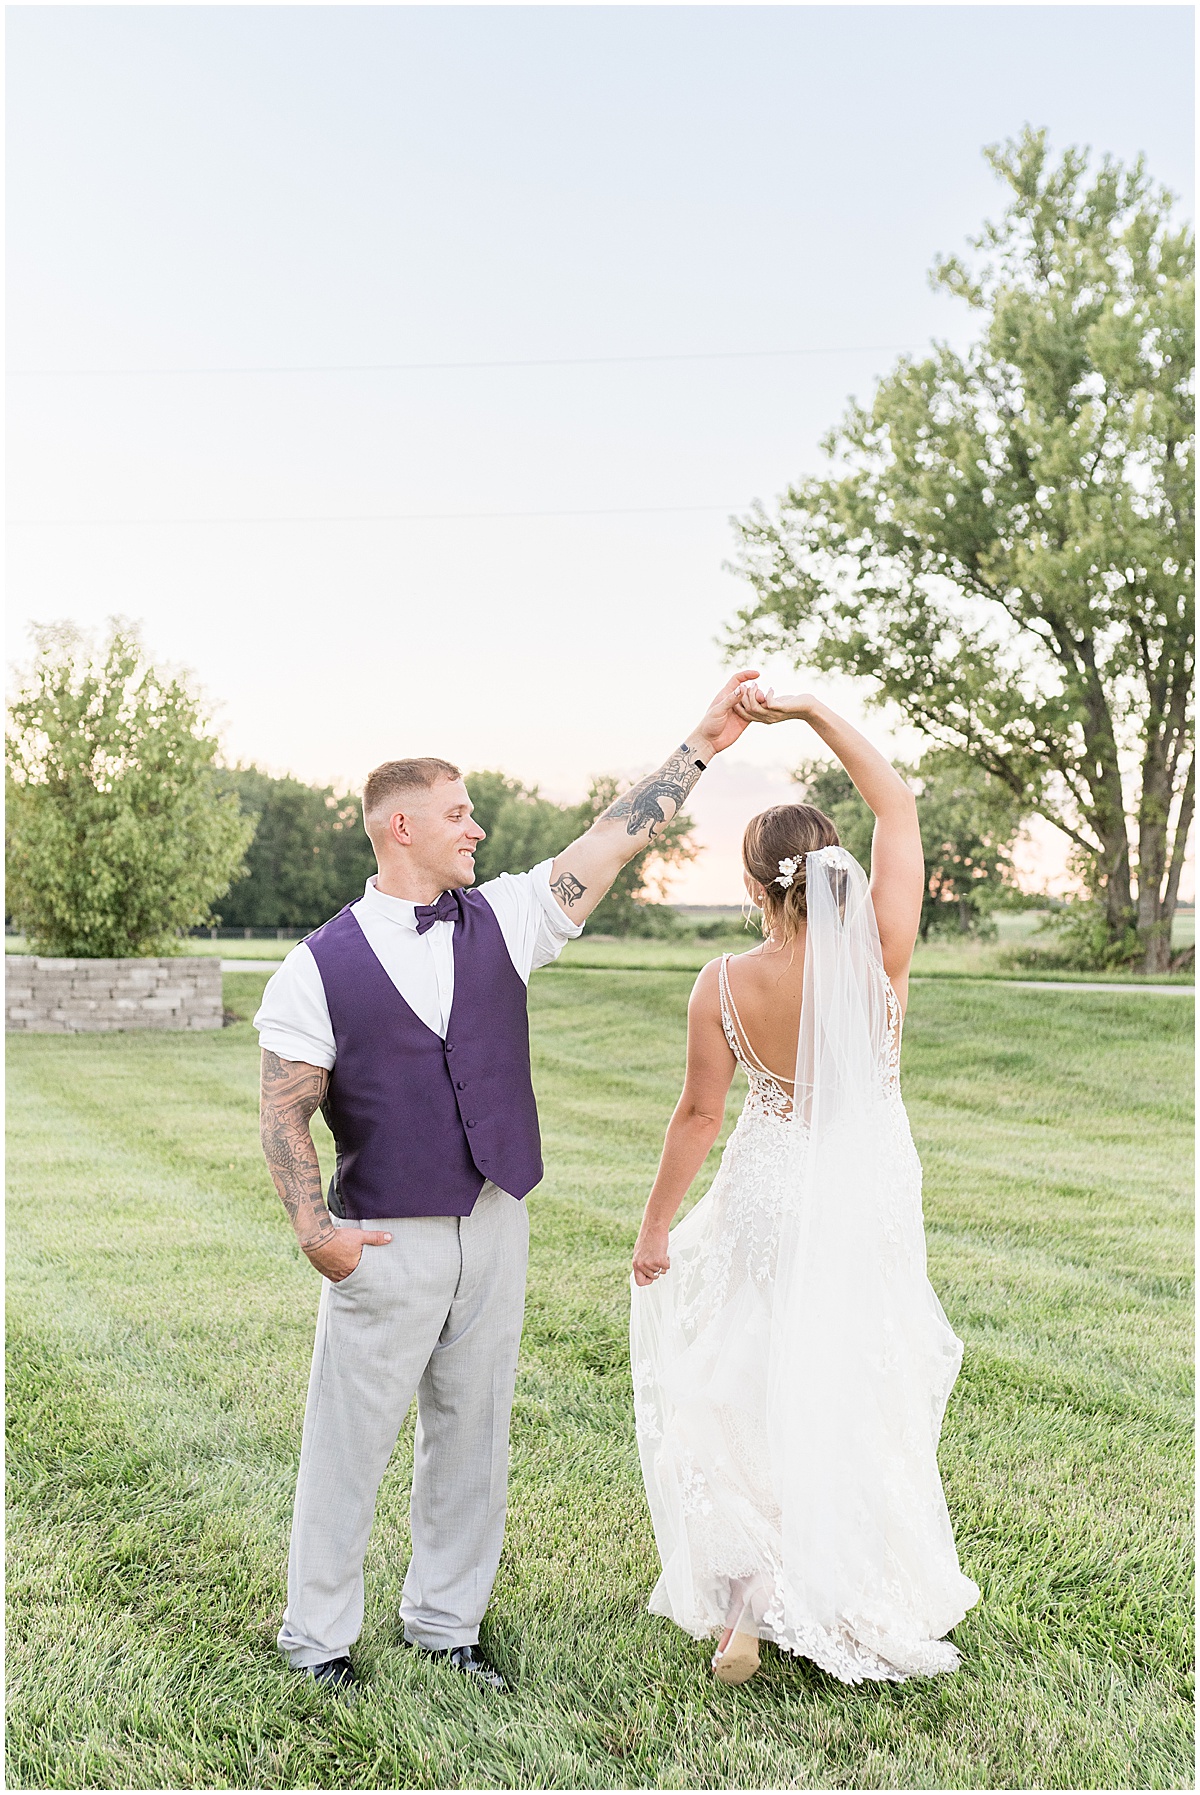 Couple dancing at sunset after White Willow Creek Barn wedding in Frankfort, Indiana